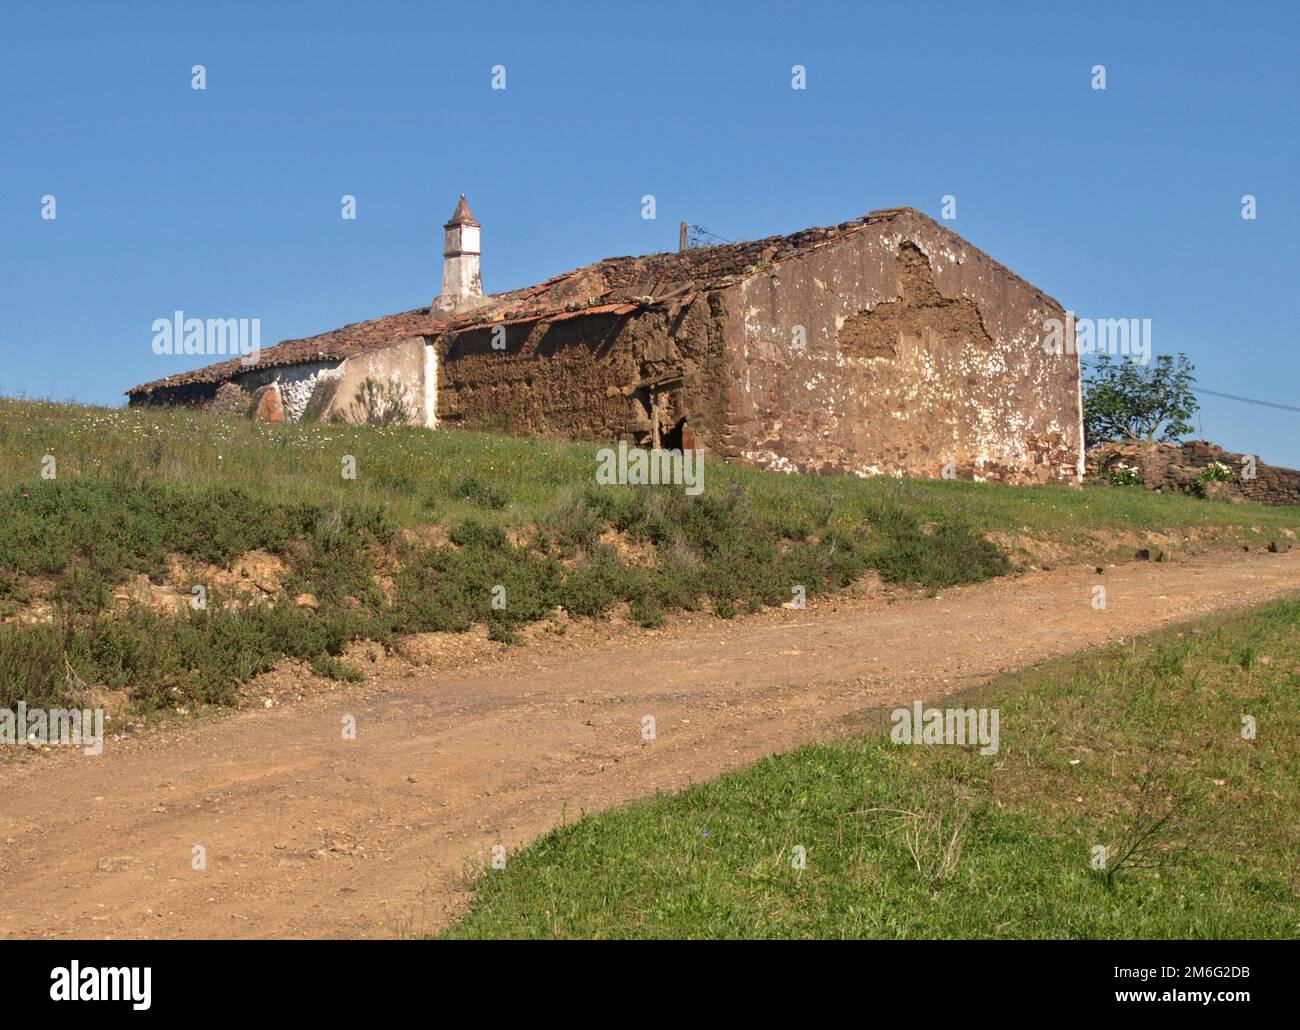 Old traditional farmhouse in the Algarve - Portugal Stock Photo